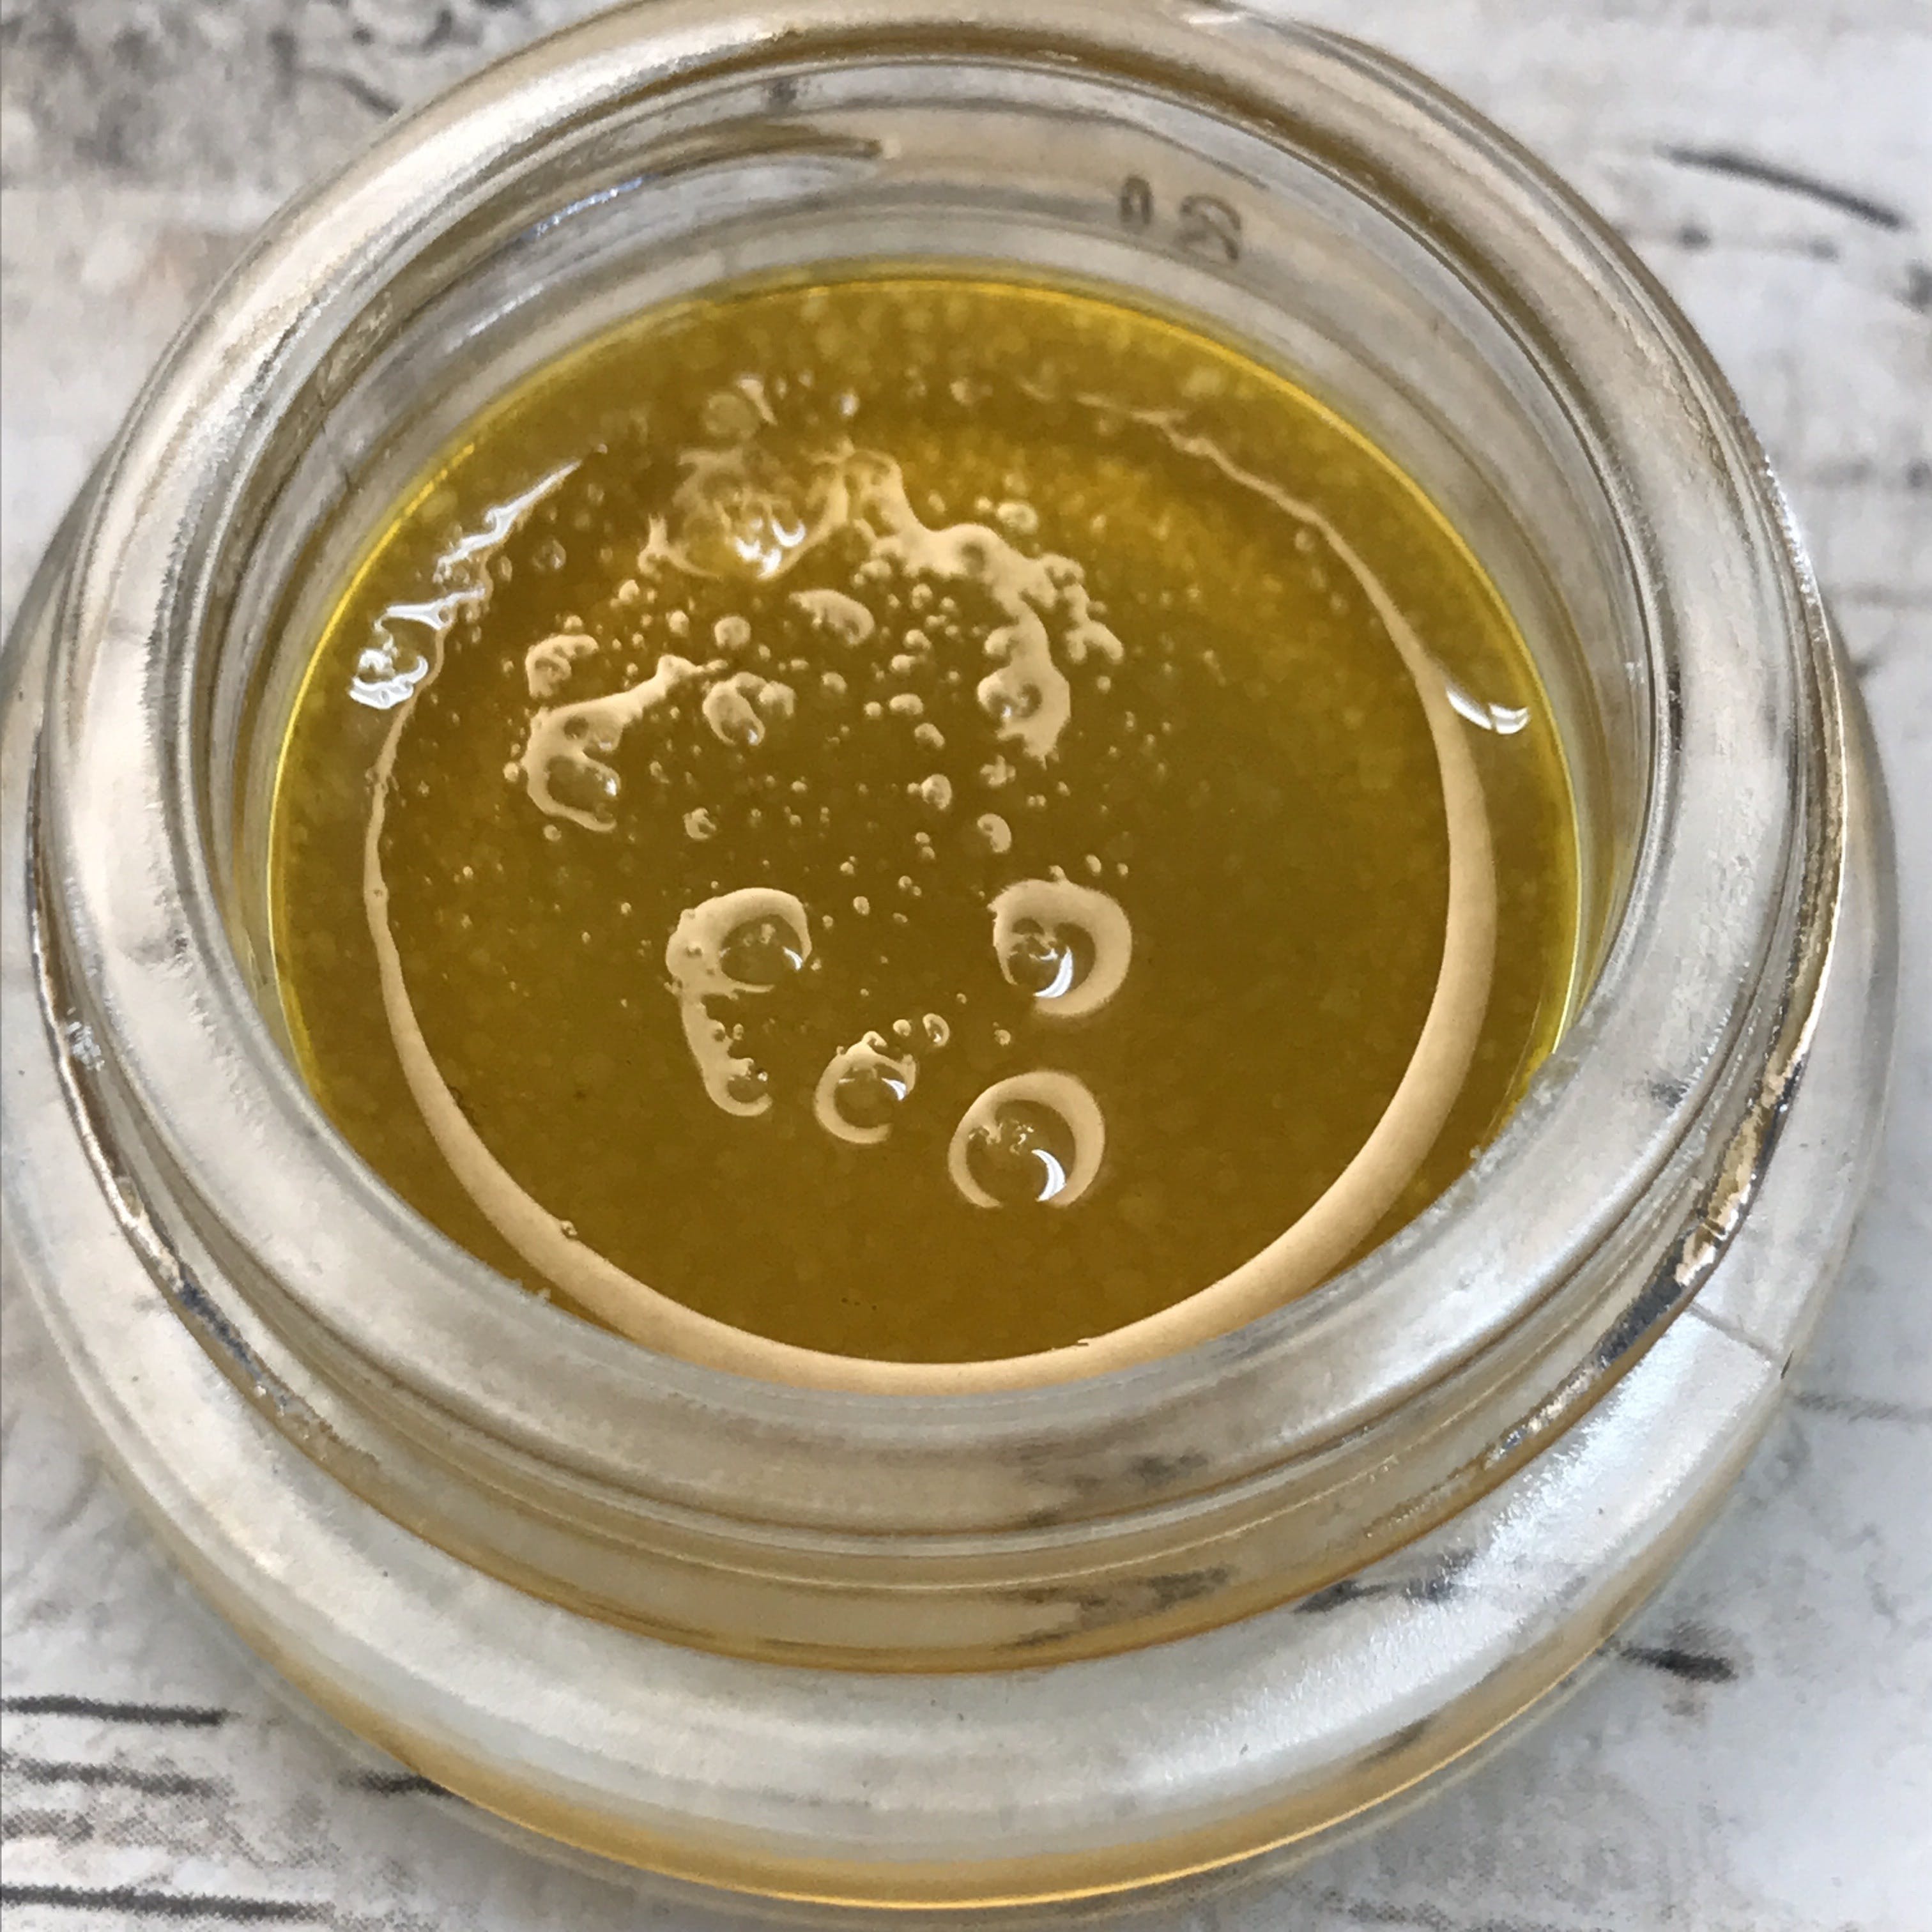 concentrate-girl-scout-cookies-live-resin-sauce